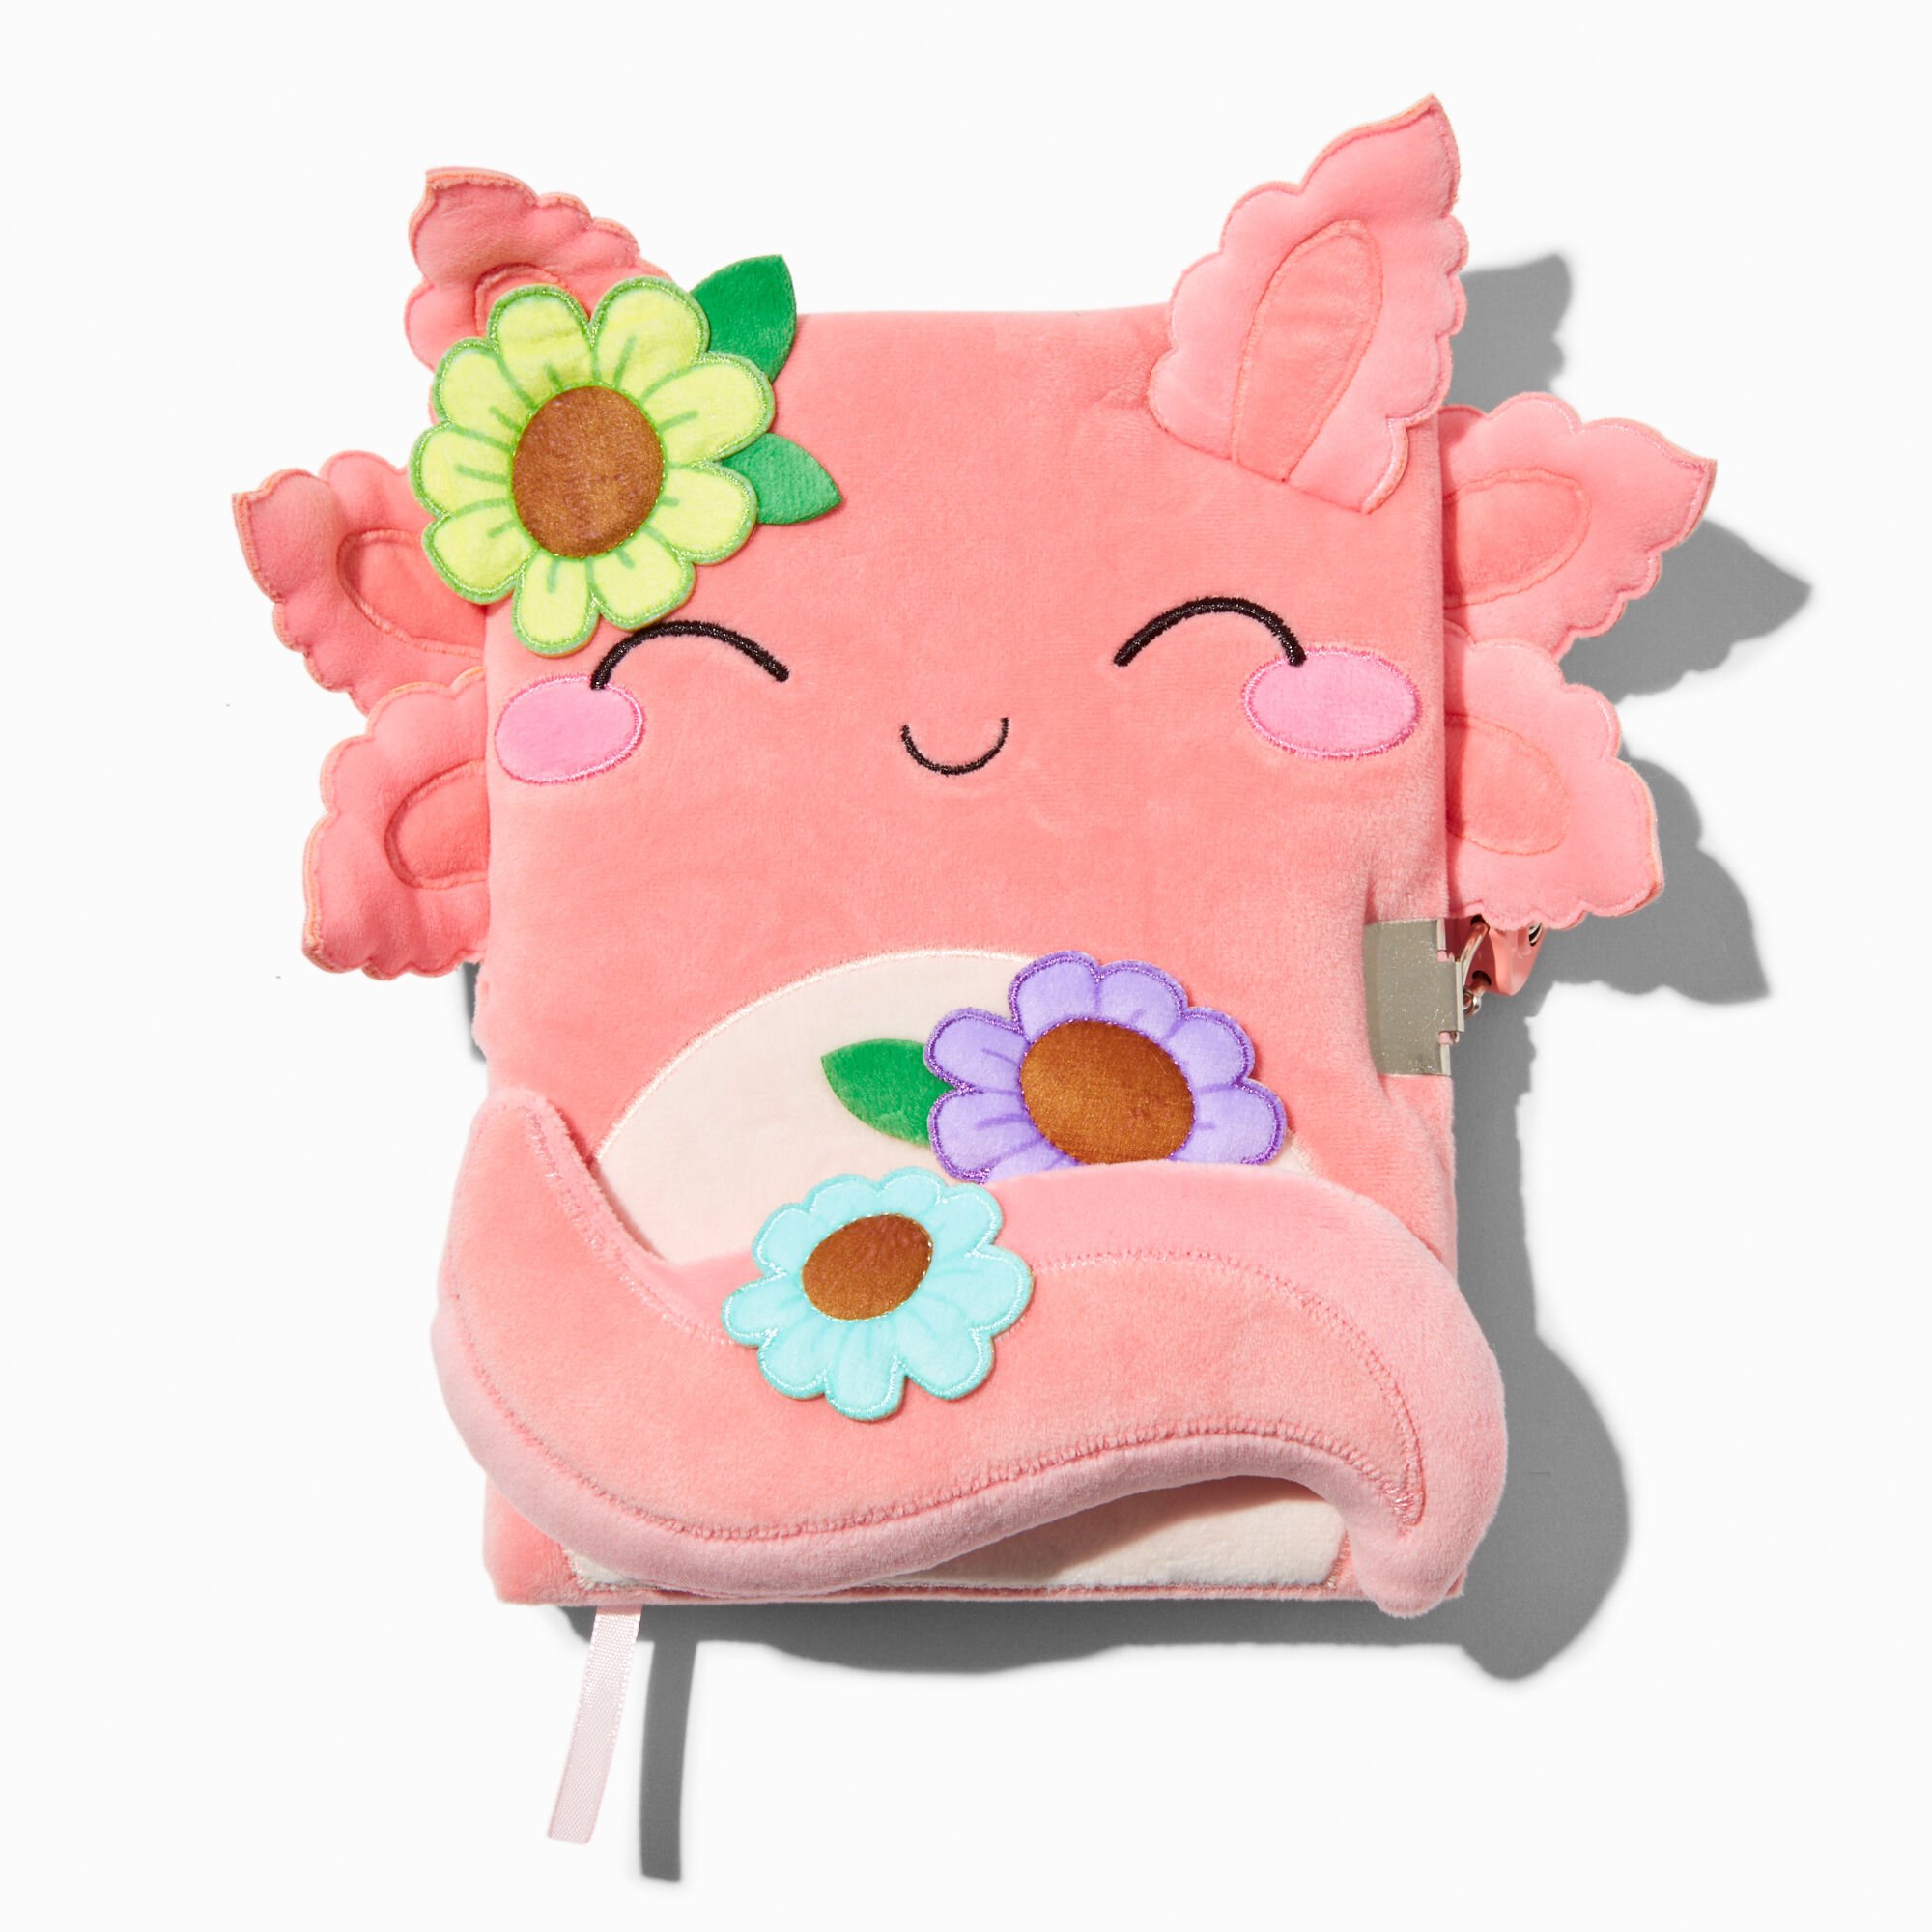 View Claires Floral Axolotl Plush Lock Diary information